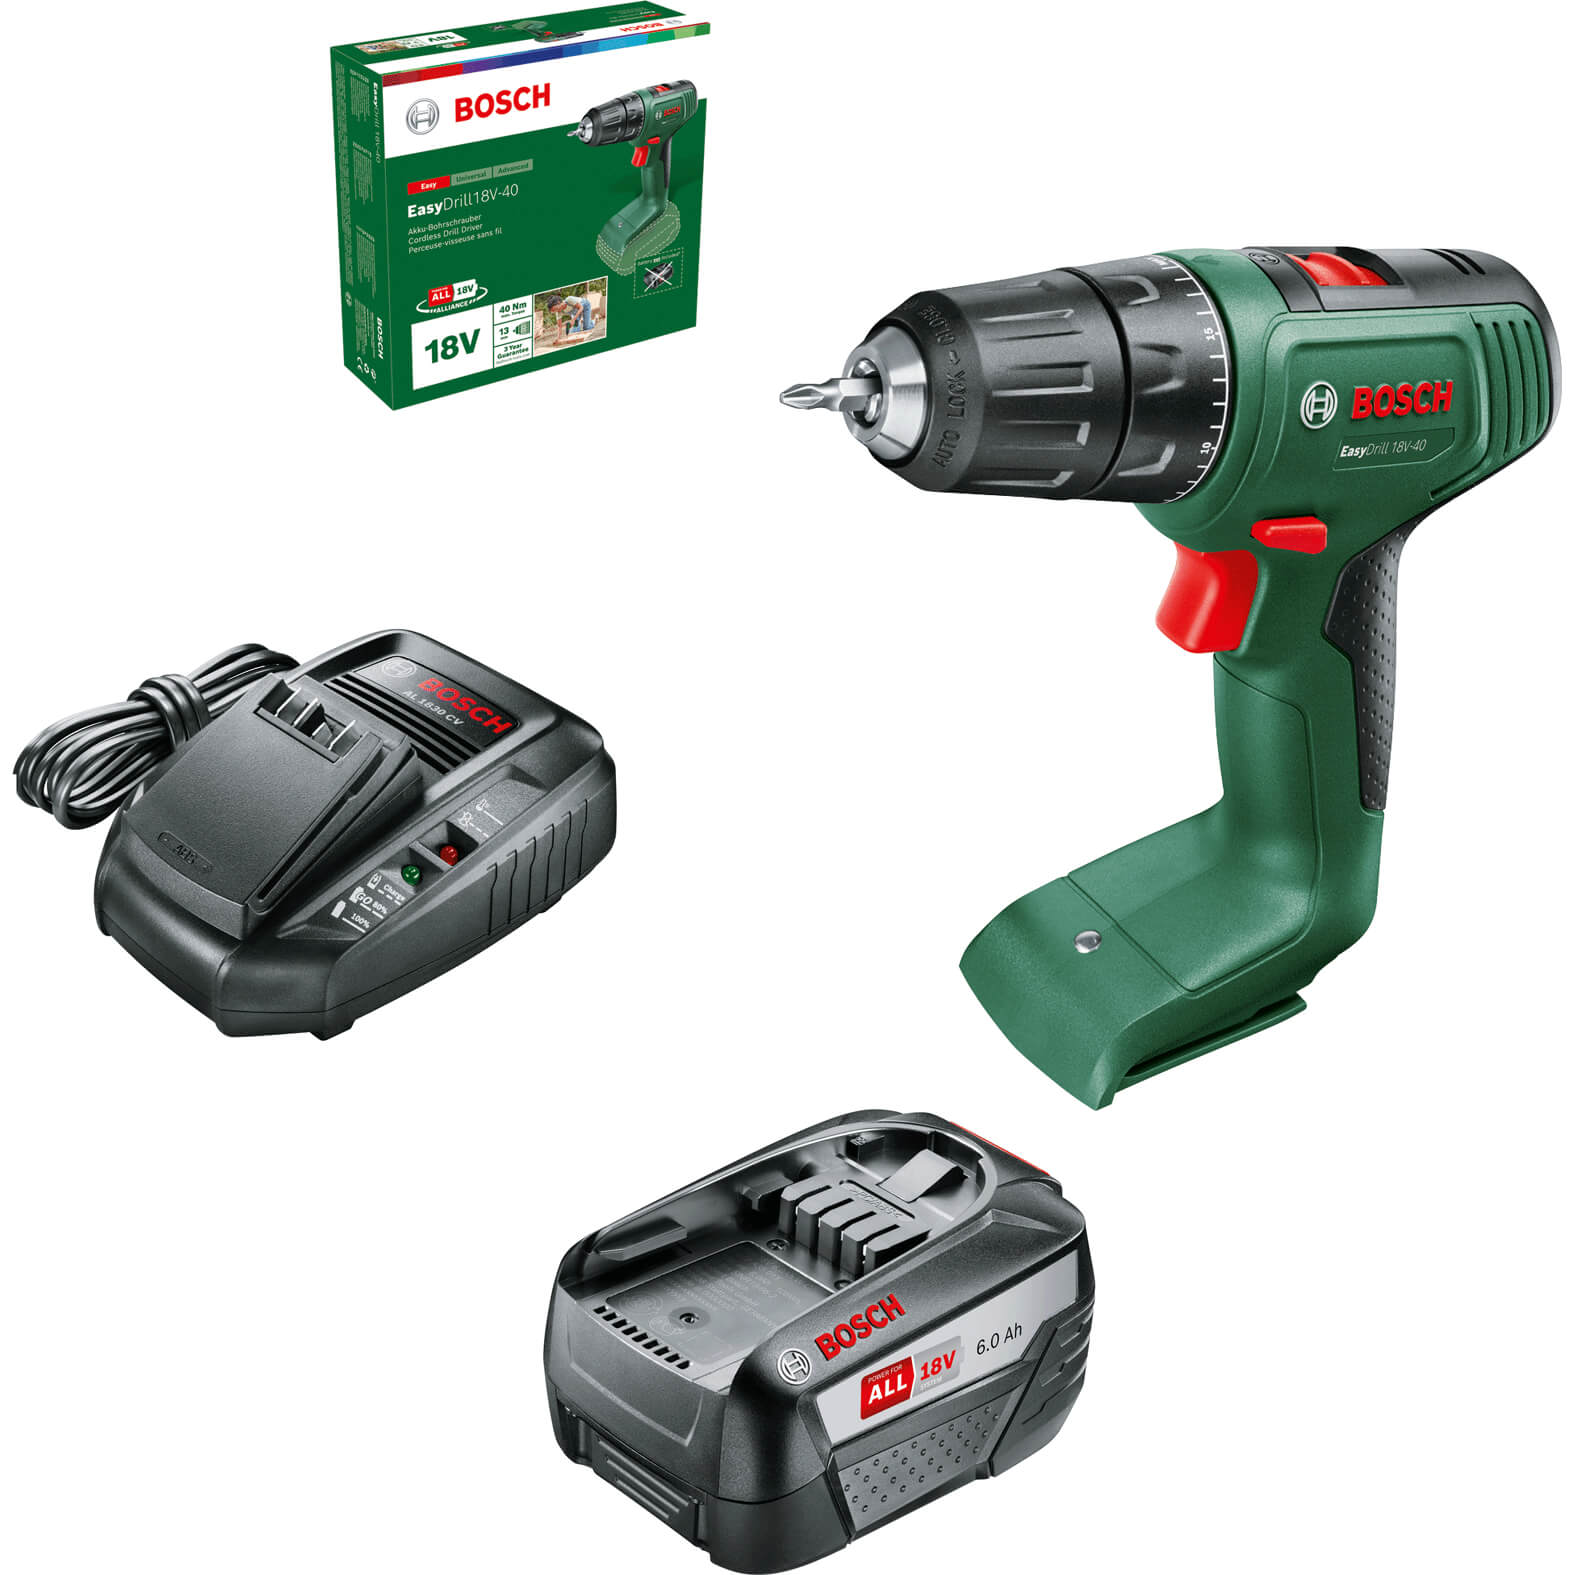 Image of Bosch EASYDRILL 18V-40 18v Cordless Drill Driver 1 x 6ah Li-ion Charger No Case